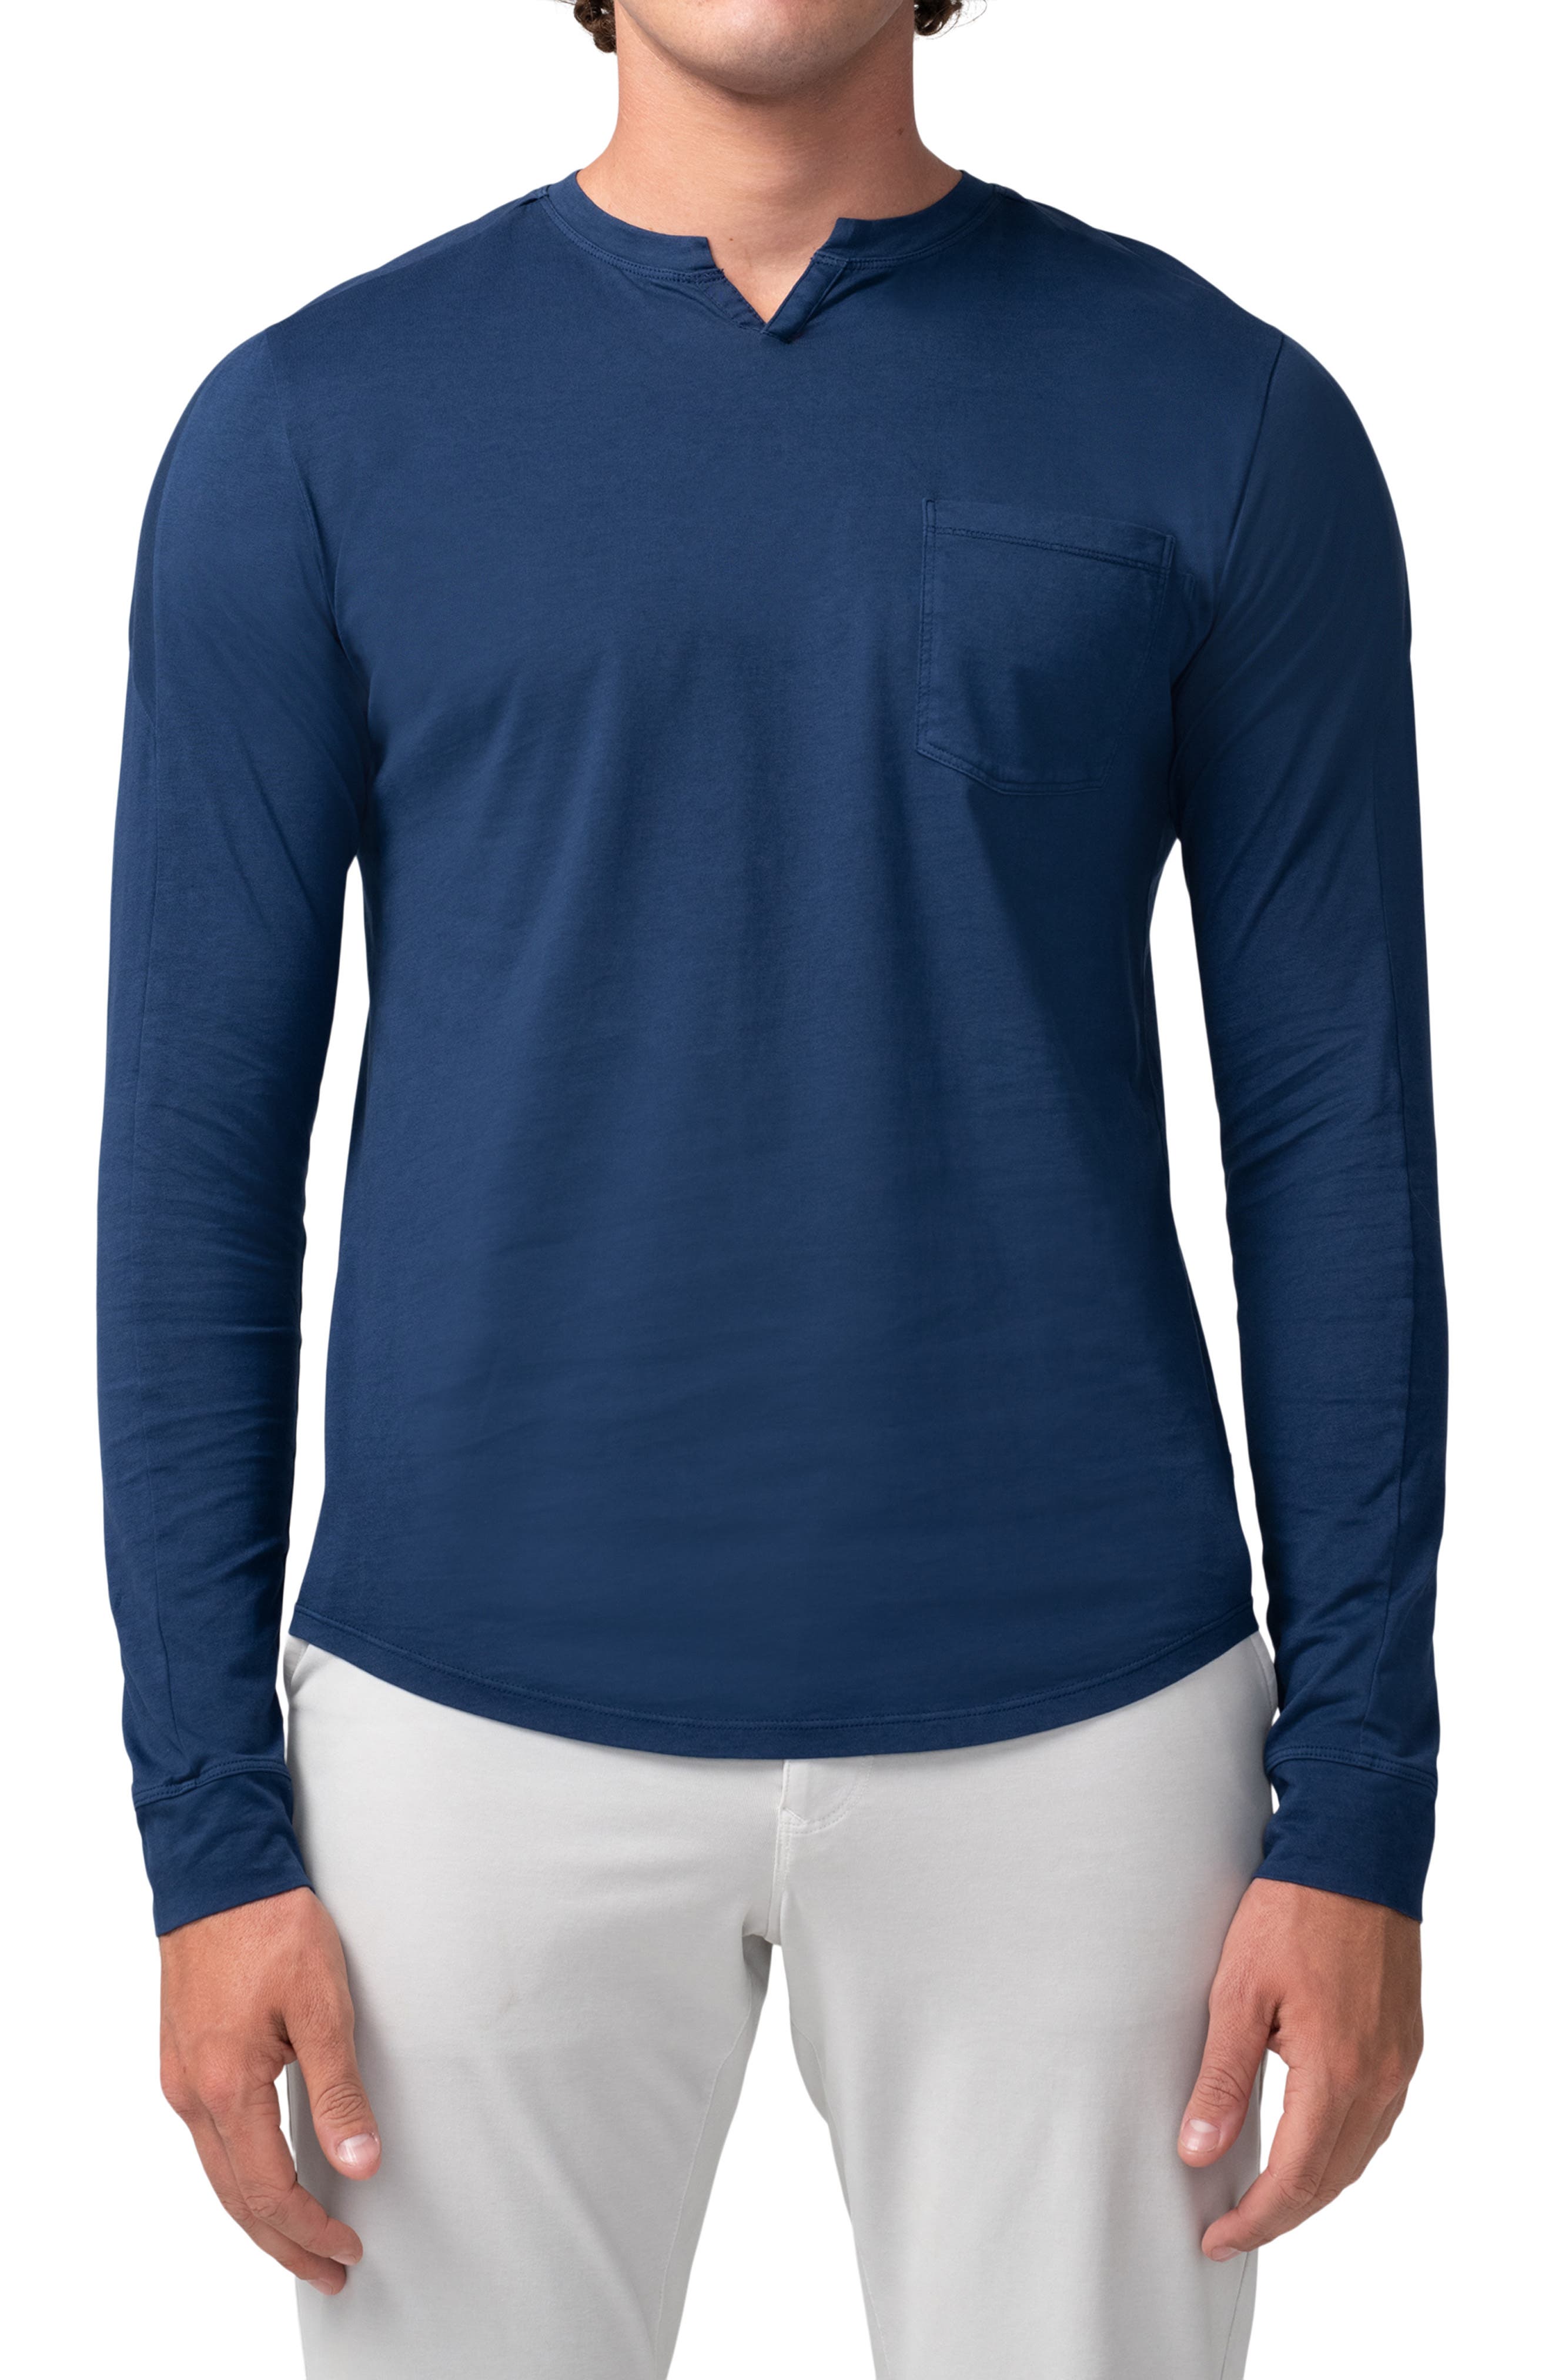 V-Neck Lower East Long-Sleeved Mens Shirts Pack of 5 100% Cotton